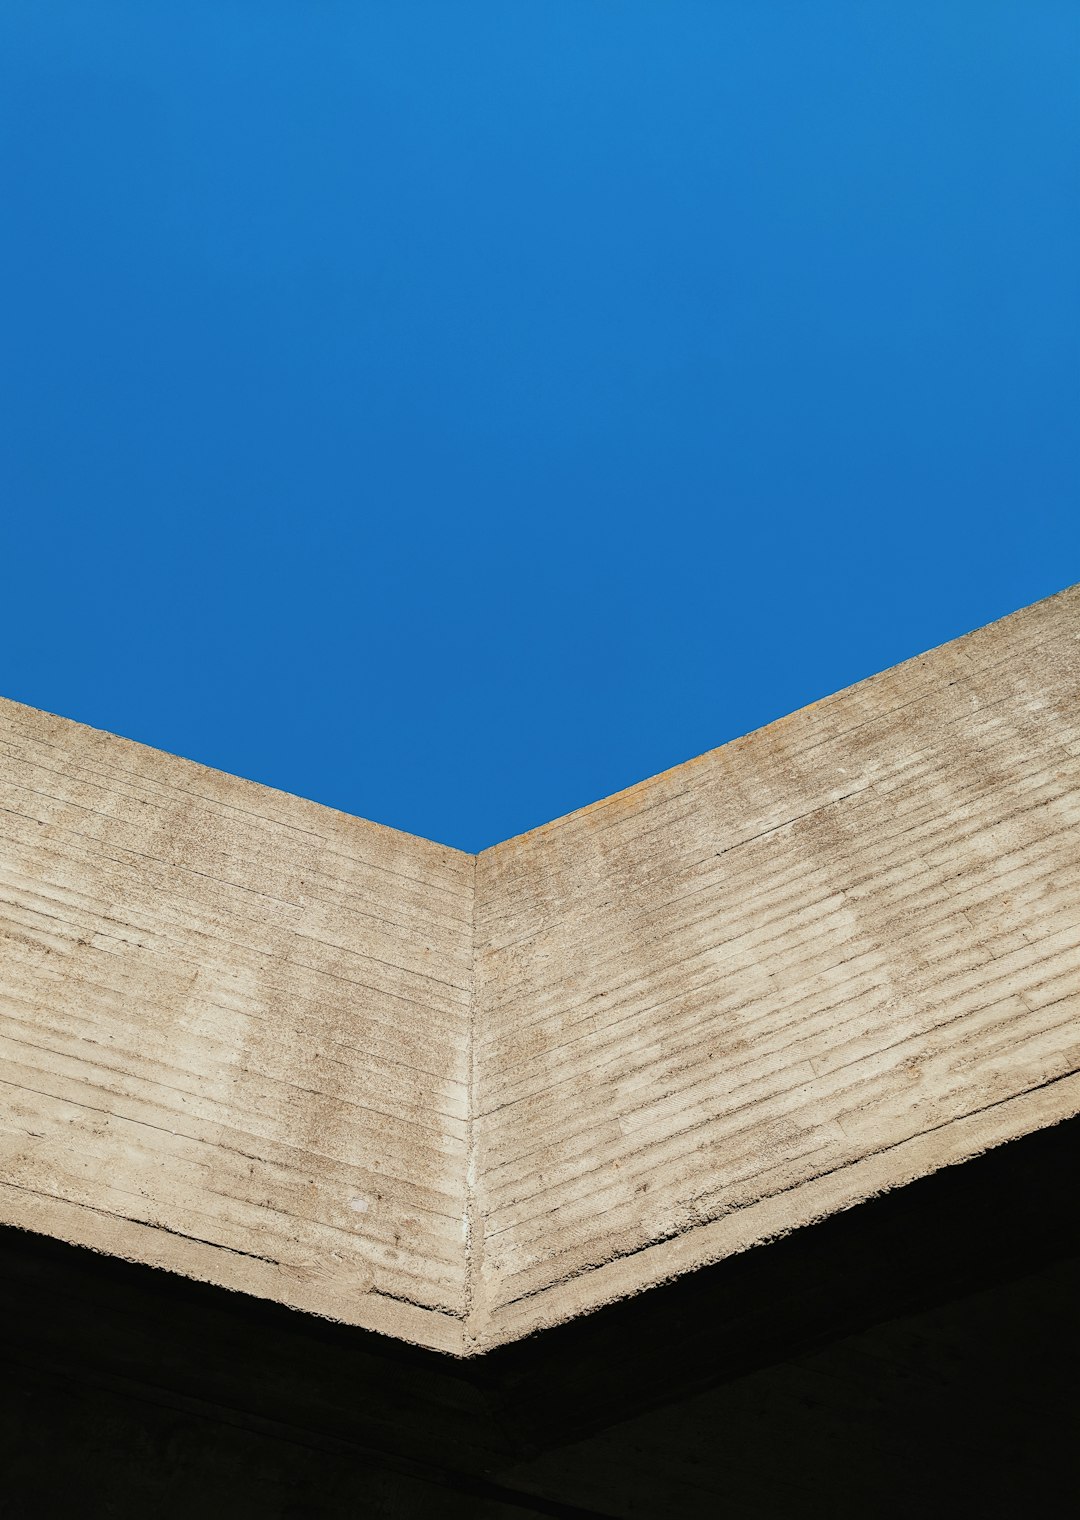 low-angle photography of gray concrete building under calm blue sky